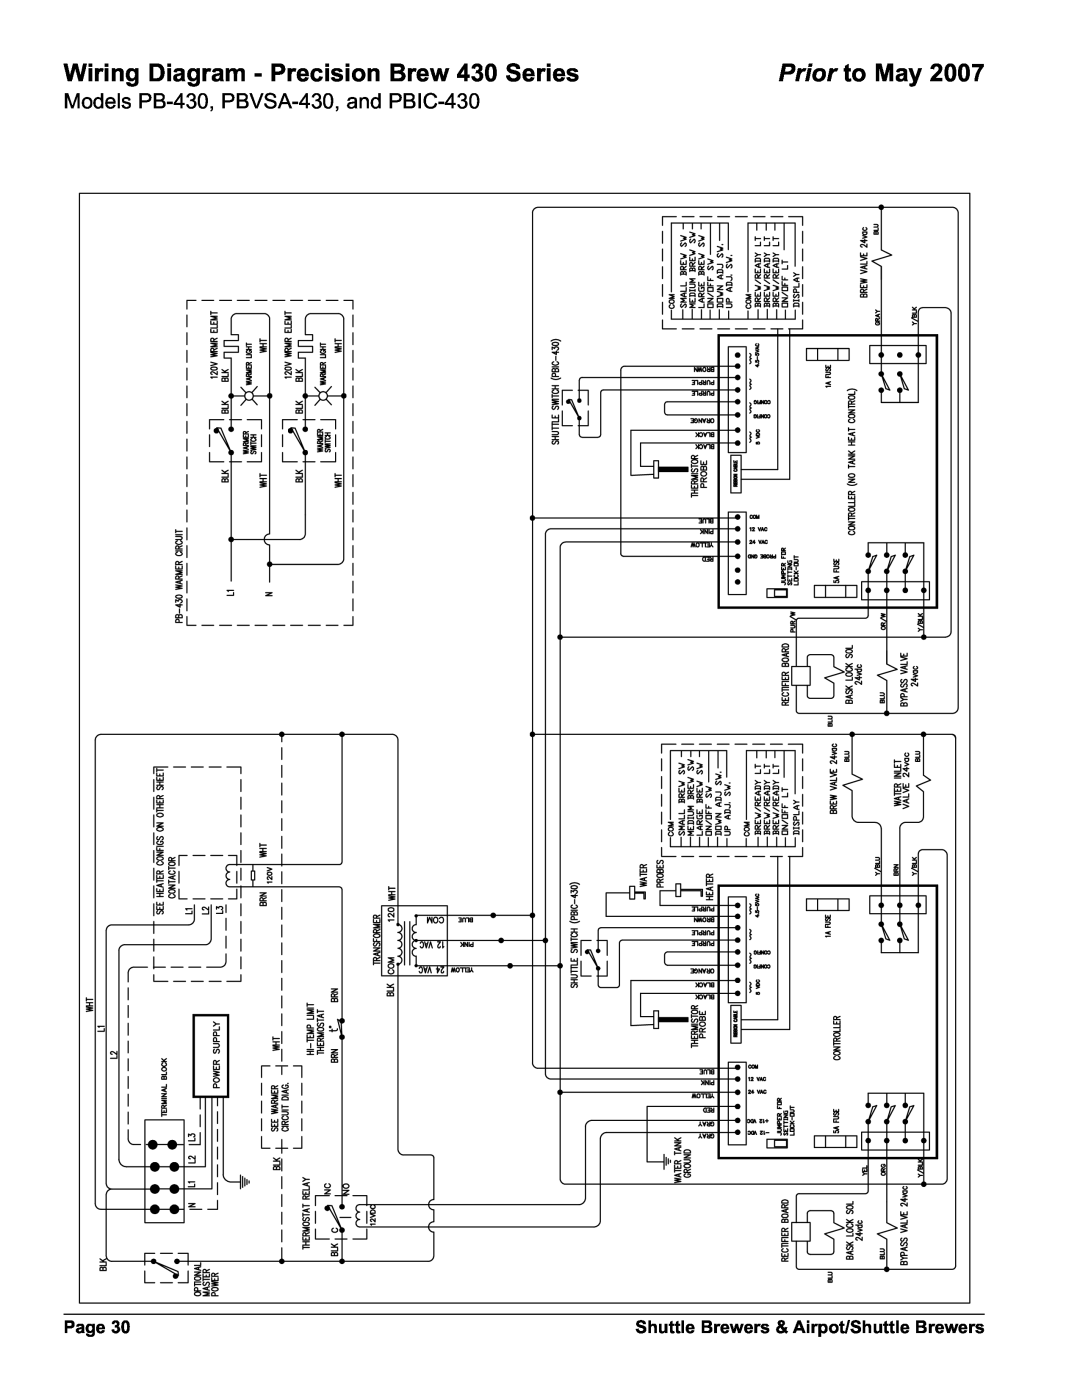 Grindmaster AM-344-04 instruction manual Wiring Diagram - Precision Brew 430 Series, Prior to May, Page 